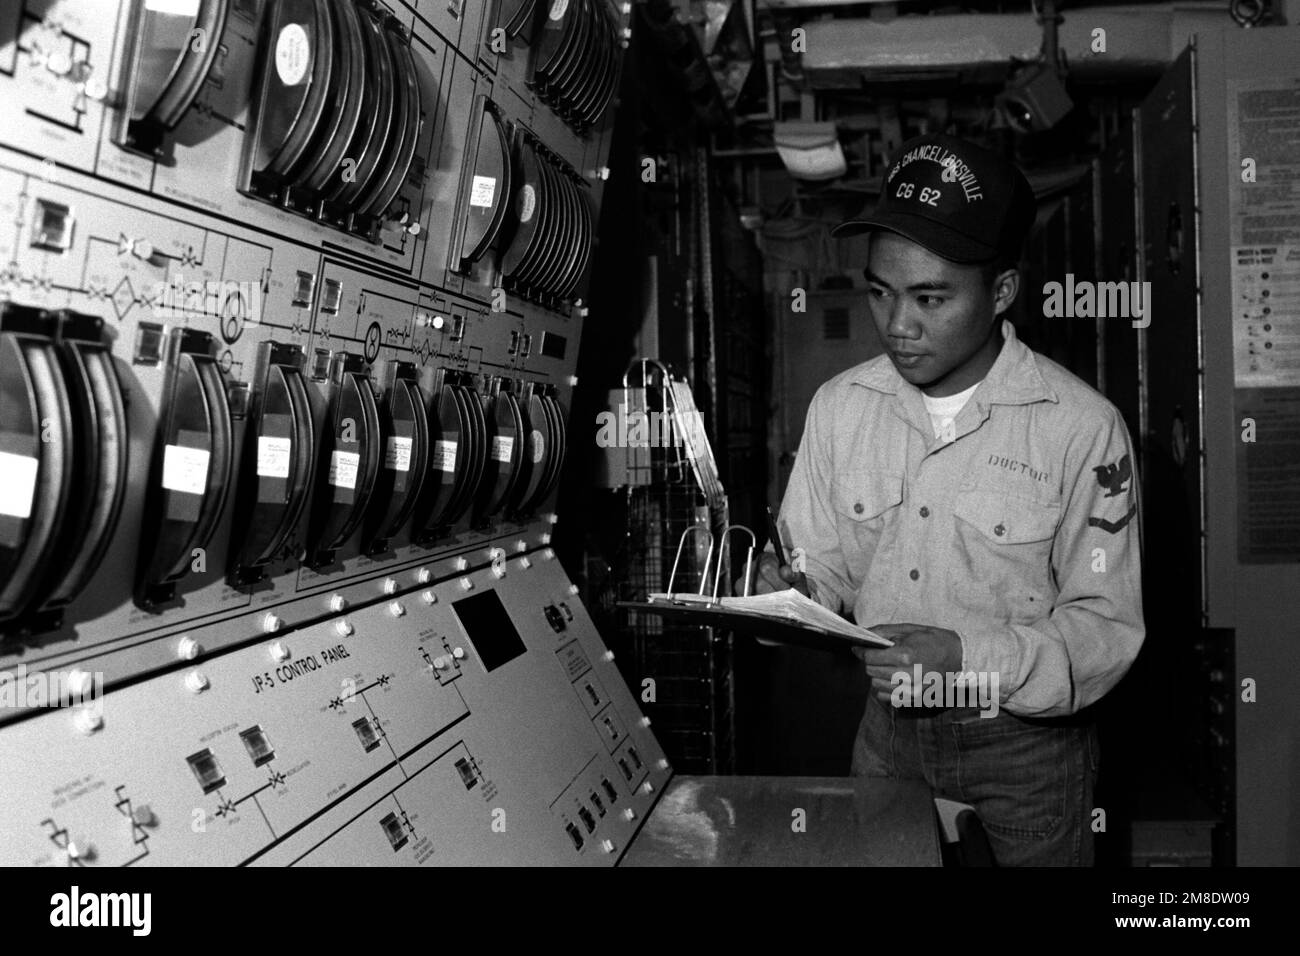 Gas Turbine Systems Technician M (Mechanical) 3rd Class John Doctor takes a reading from the fuel control panel for the engines aboard the guided cruiser USS CHANCELLORSVILLE (CG 62). Country: Unknown Stock Photo